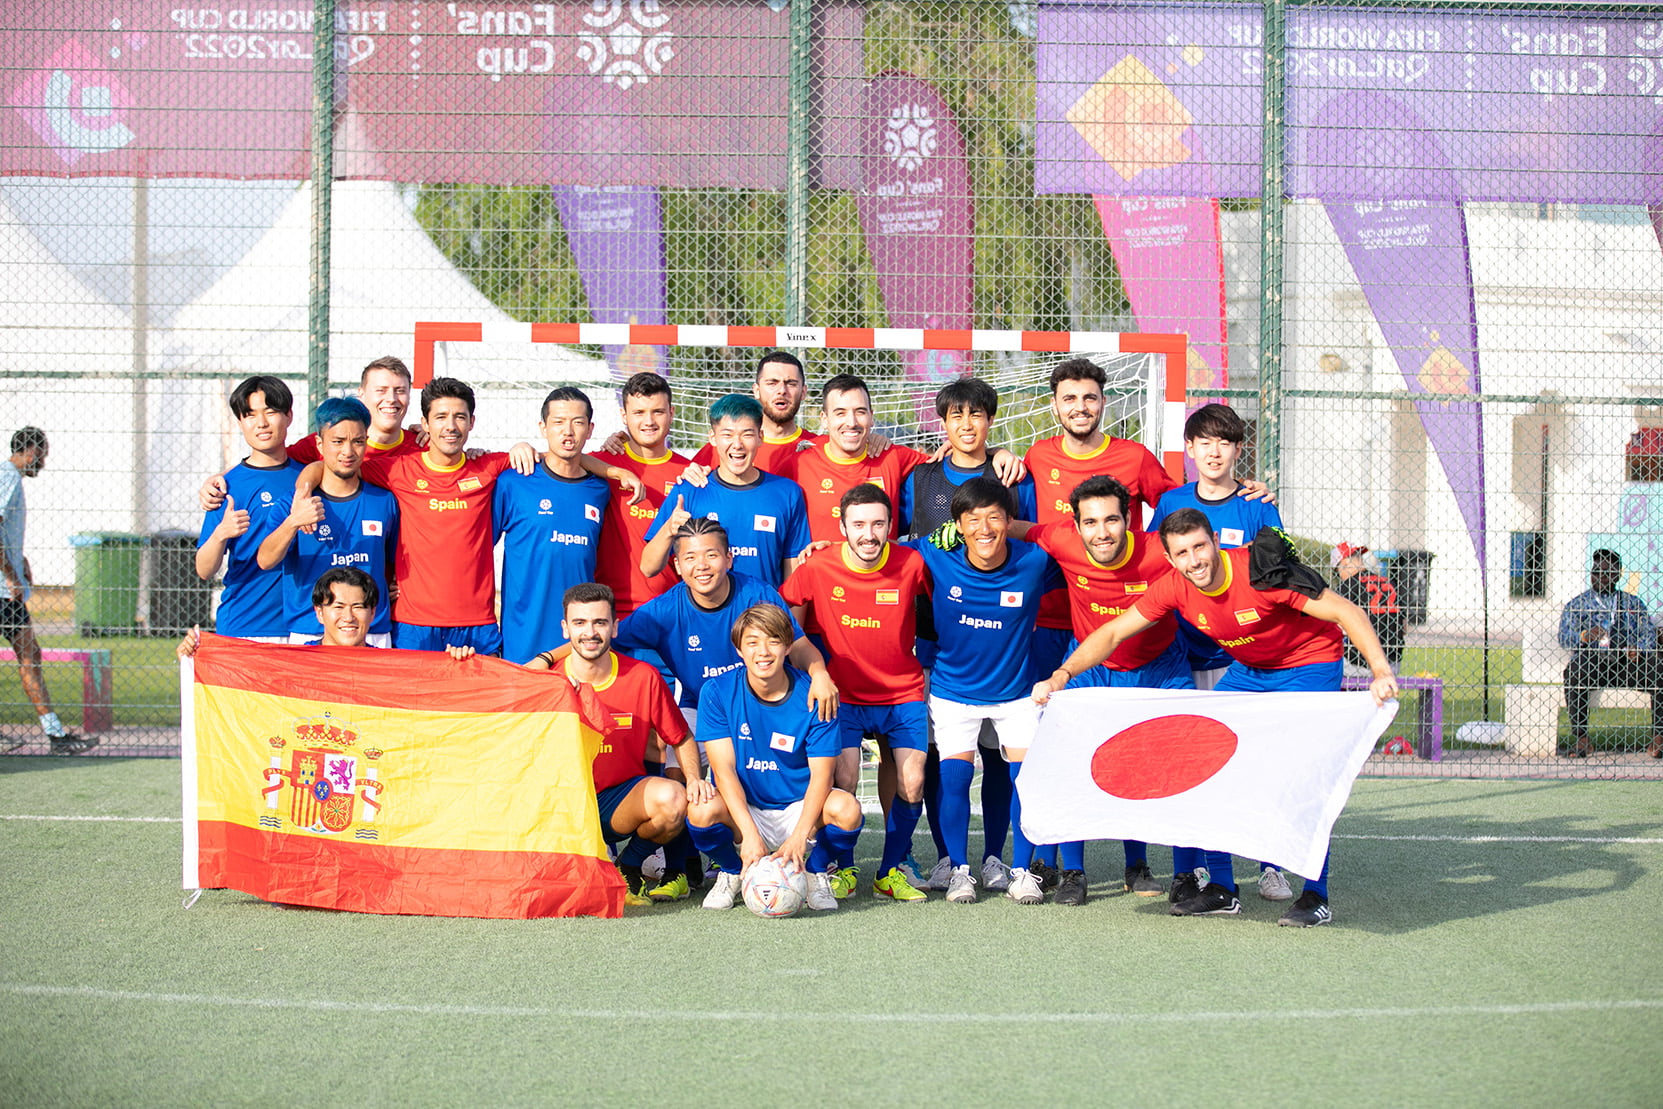 Japan and Spain - Fans’ Cup at the FIFA World Cup Qatar 2022